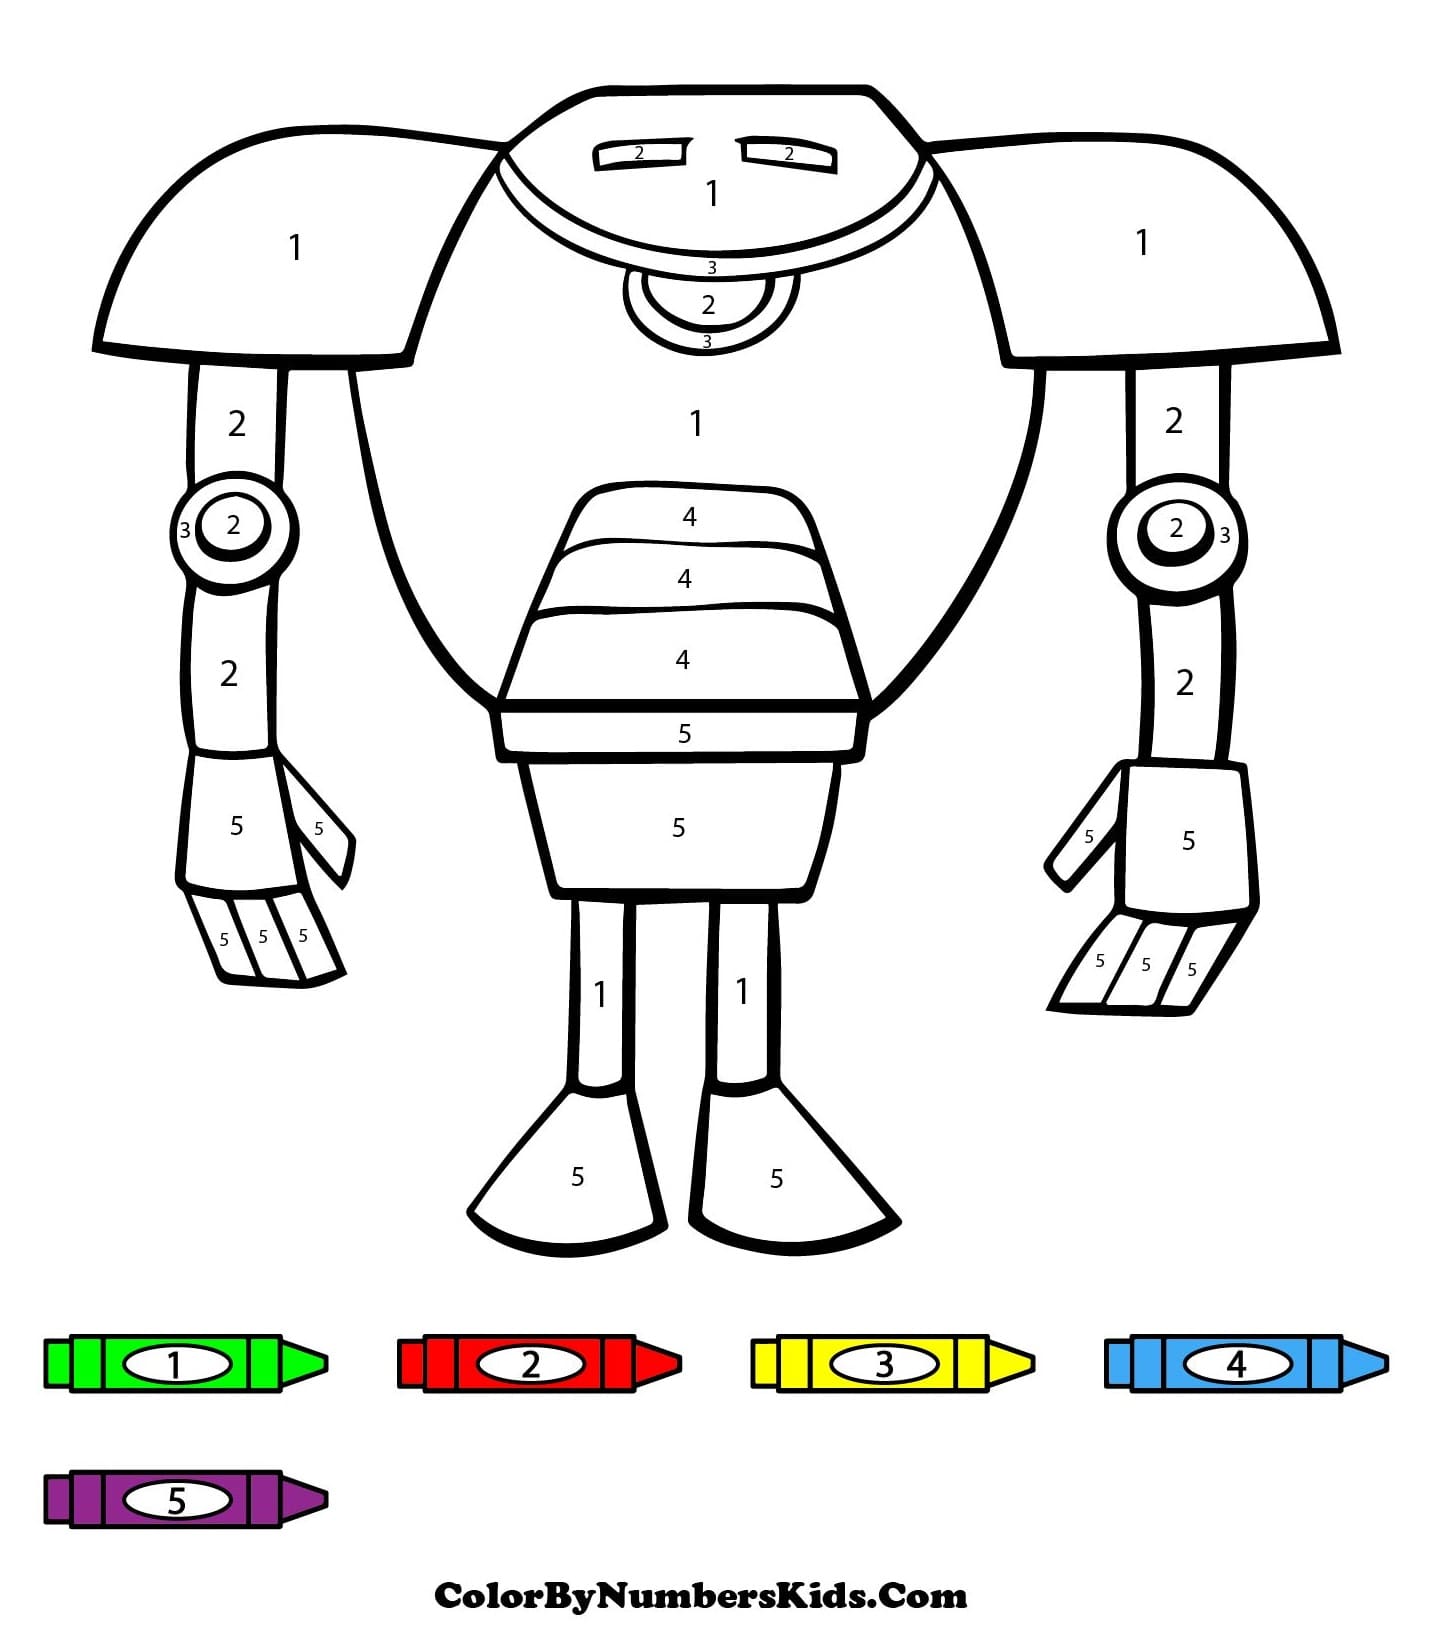 Cool Robot Color By Number